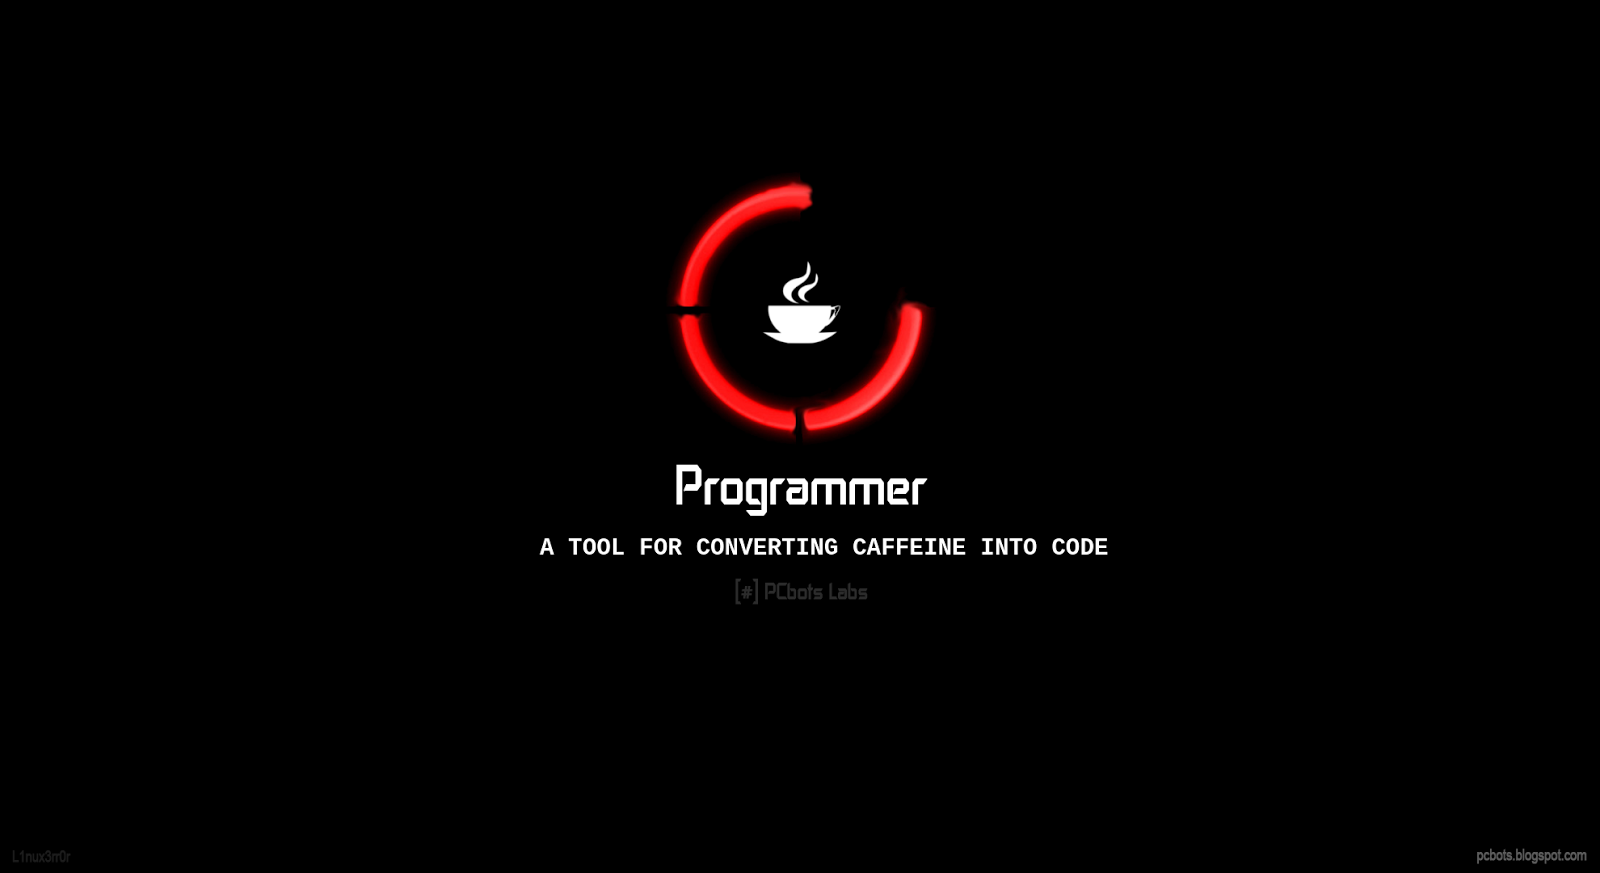 Programmers And Coders Wallpapers HD By PCbots   Part   II PCbots